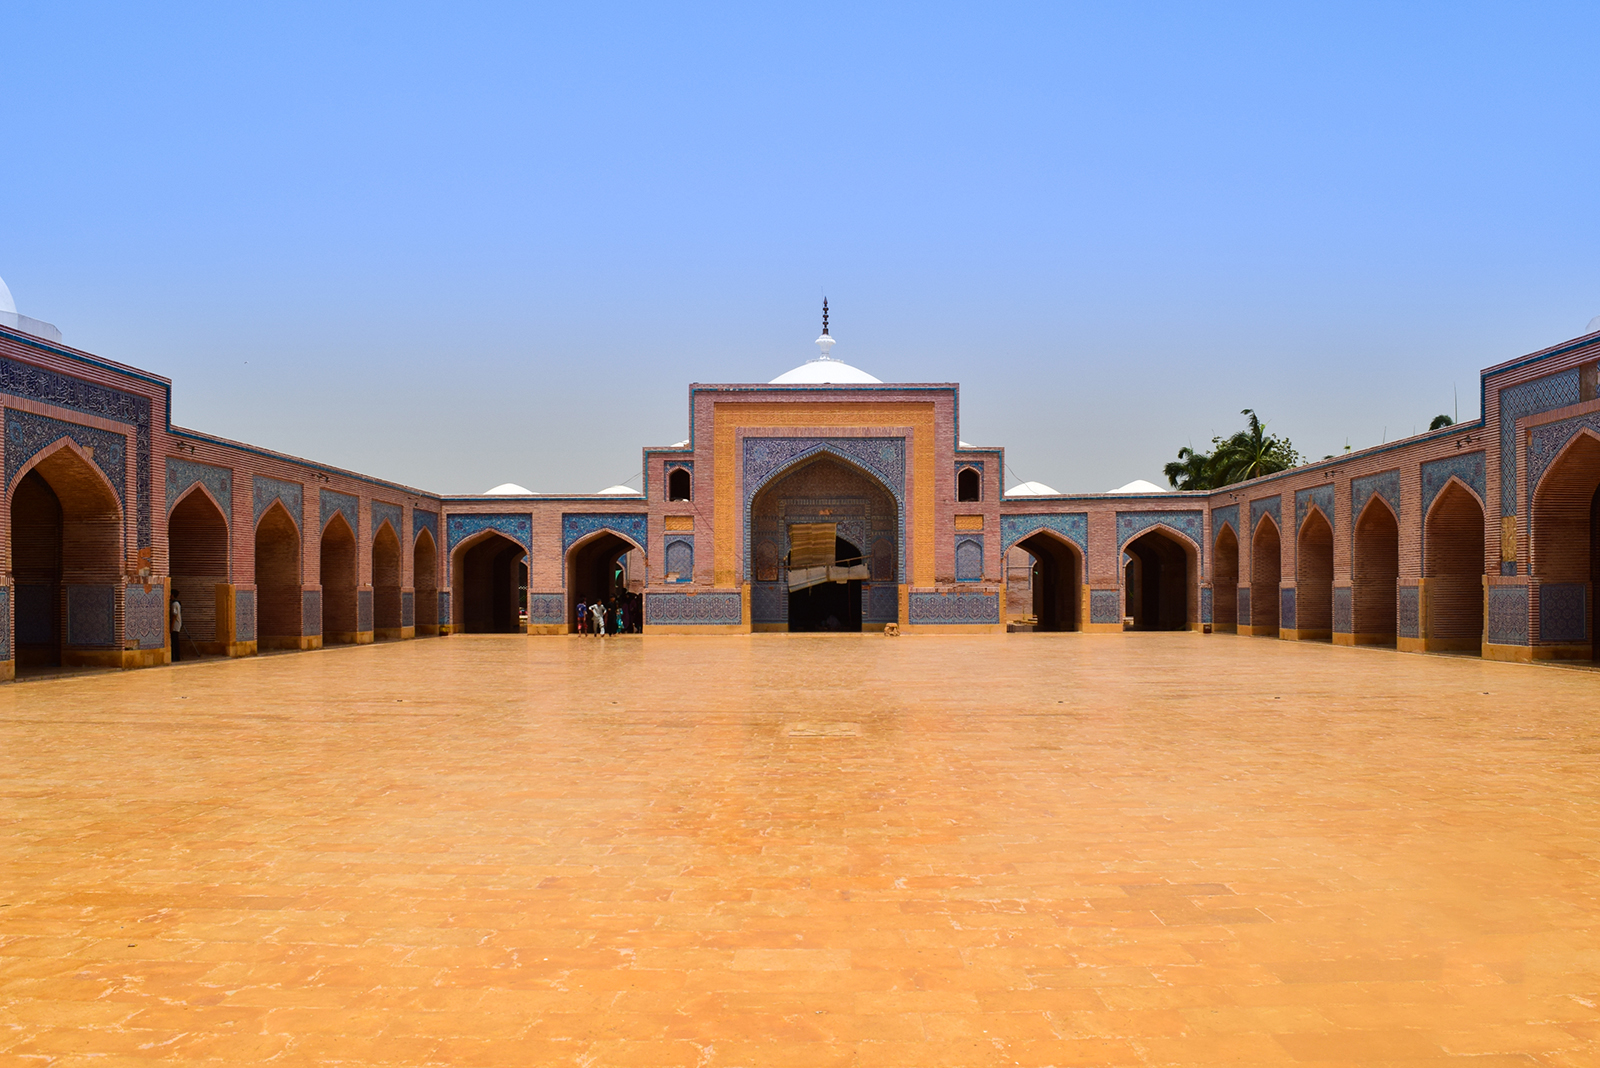 Big mosque with courtyard design